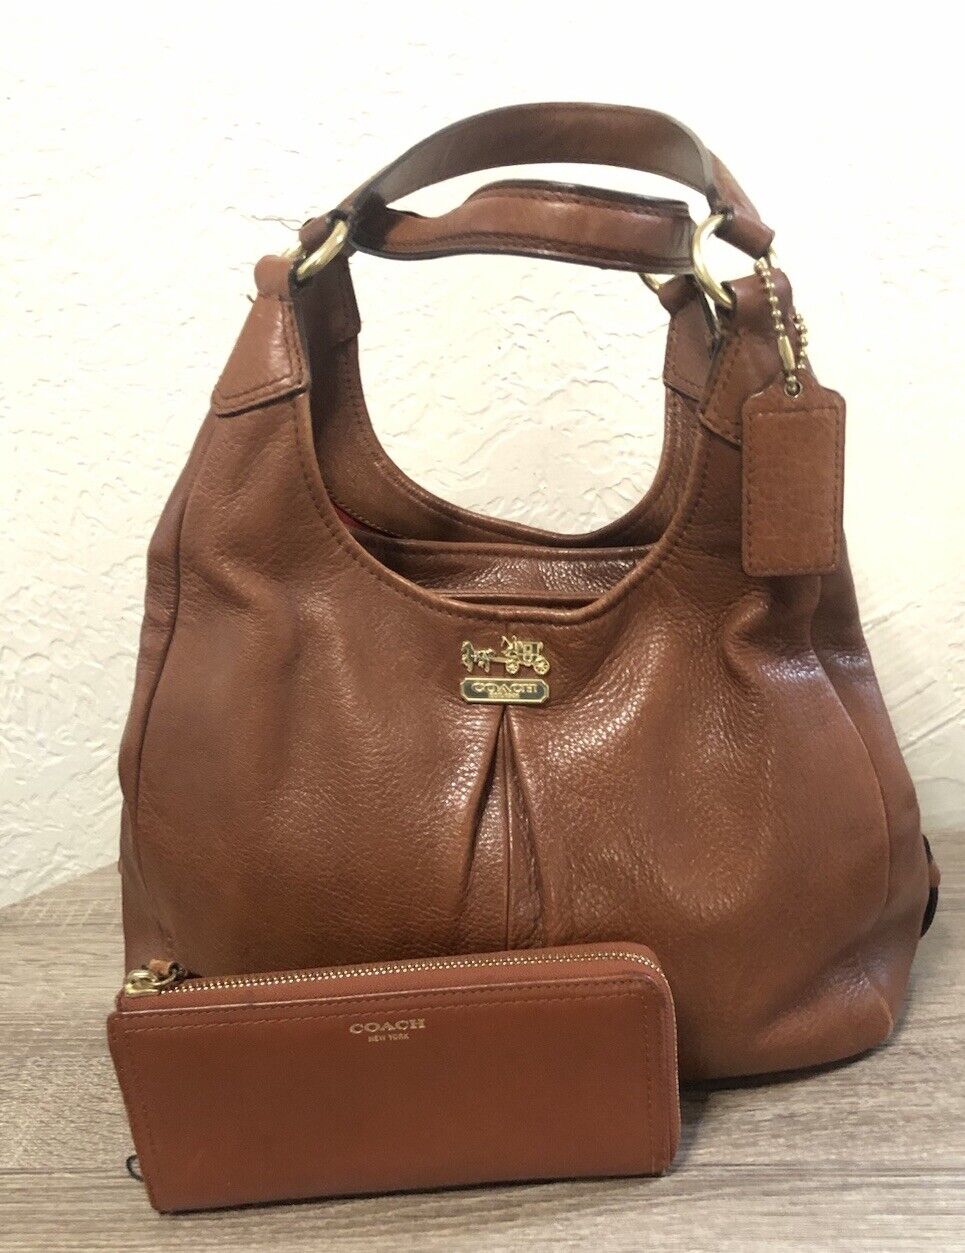 Coach Madison Maggie Brown Leather Three Section Shoulder Bag 21225 With Wallet